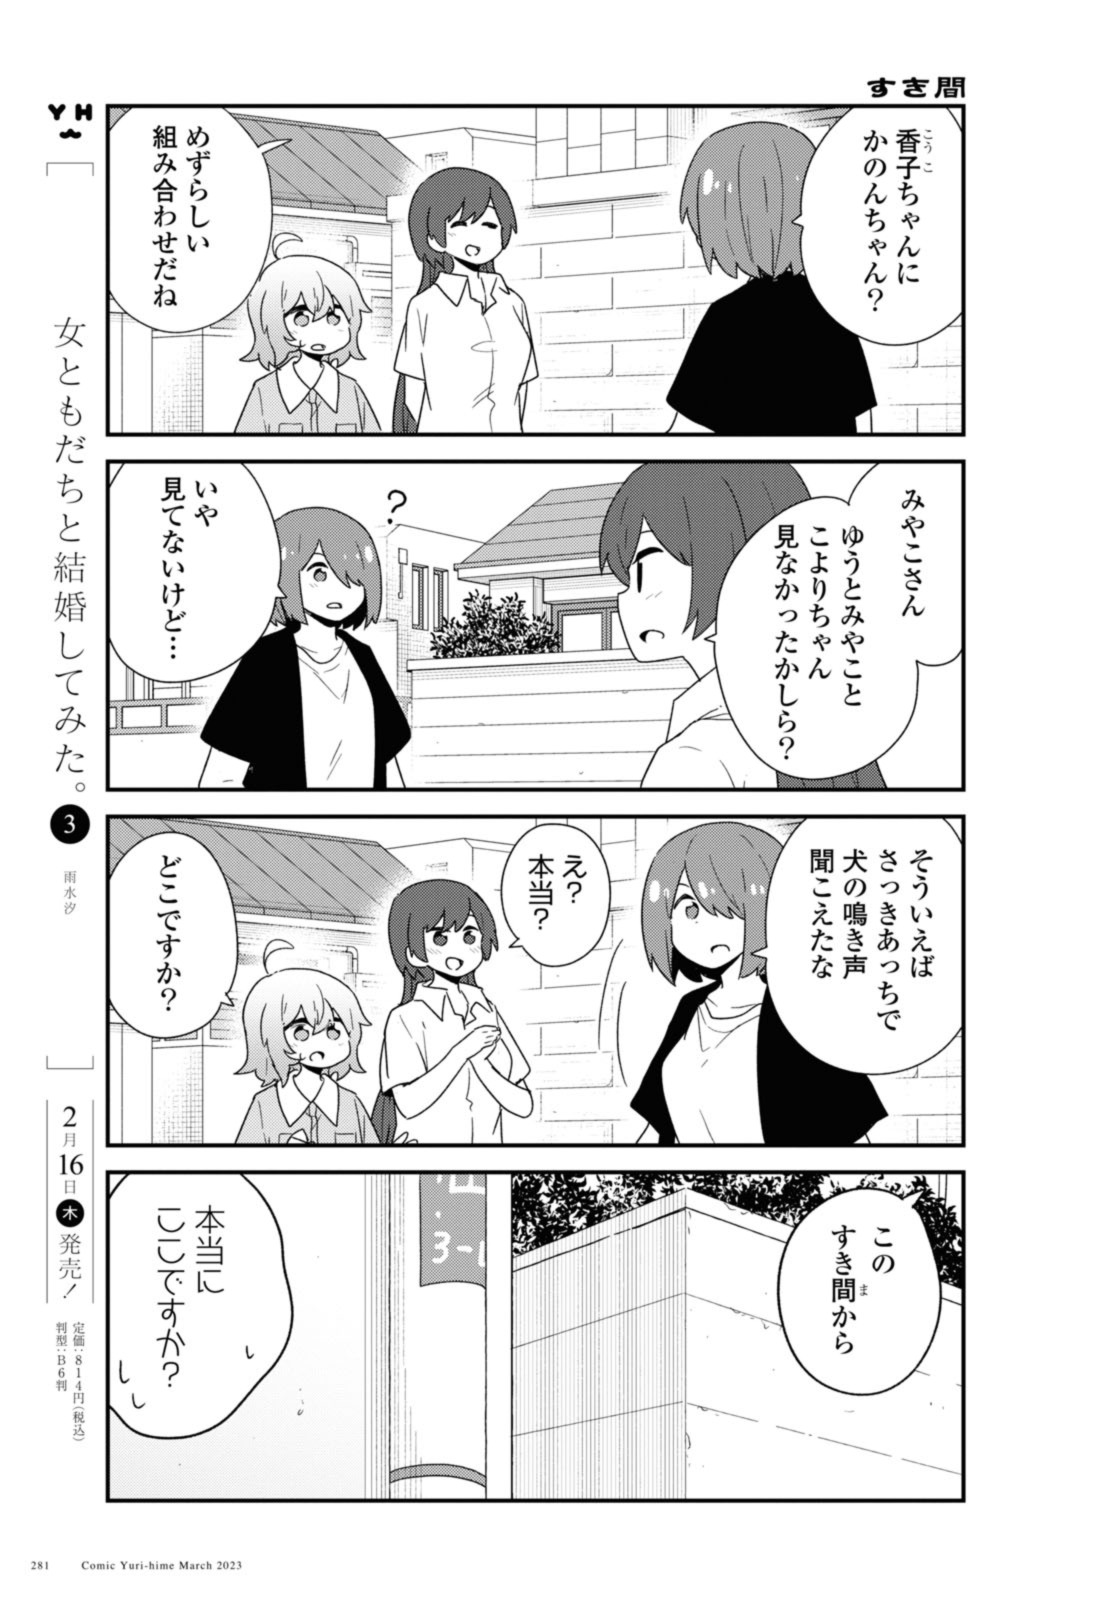 Wataten! An Angel Flew Down to Me 私に天使が舞い降りた！ 第103話 - Page 10